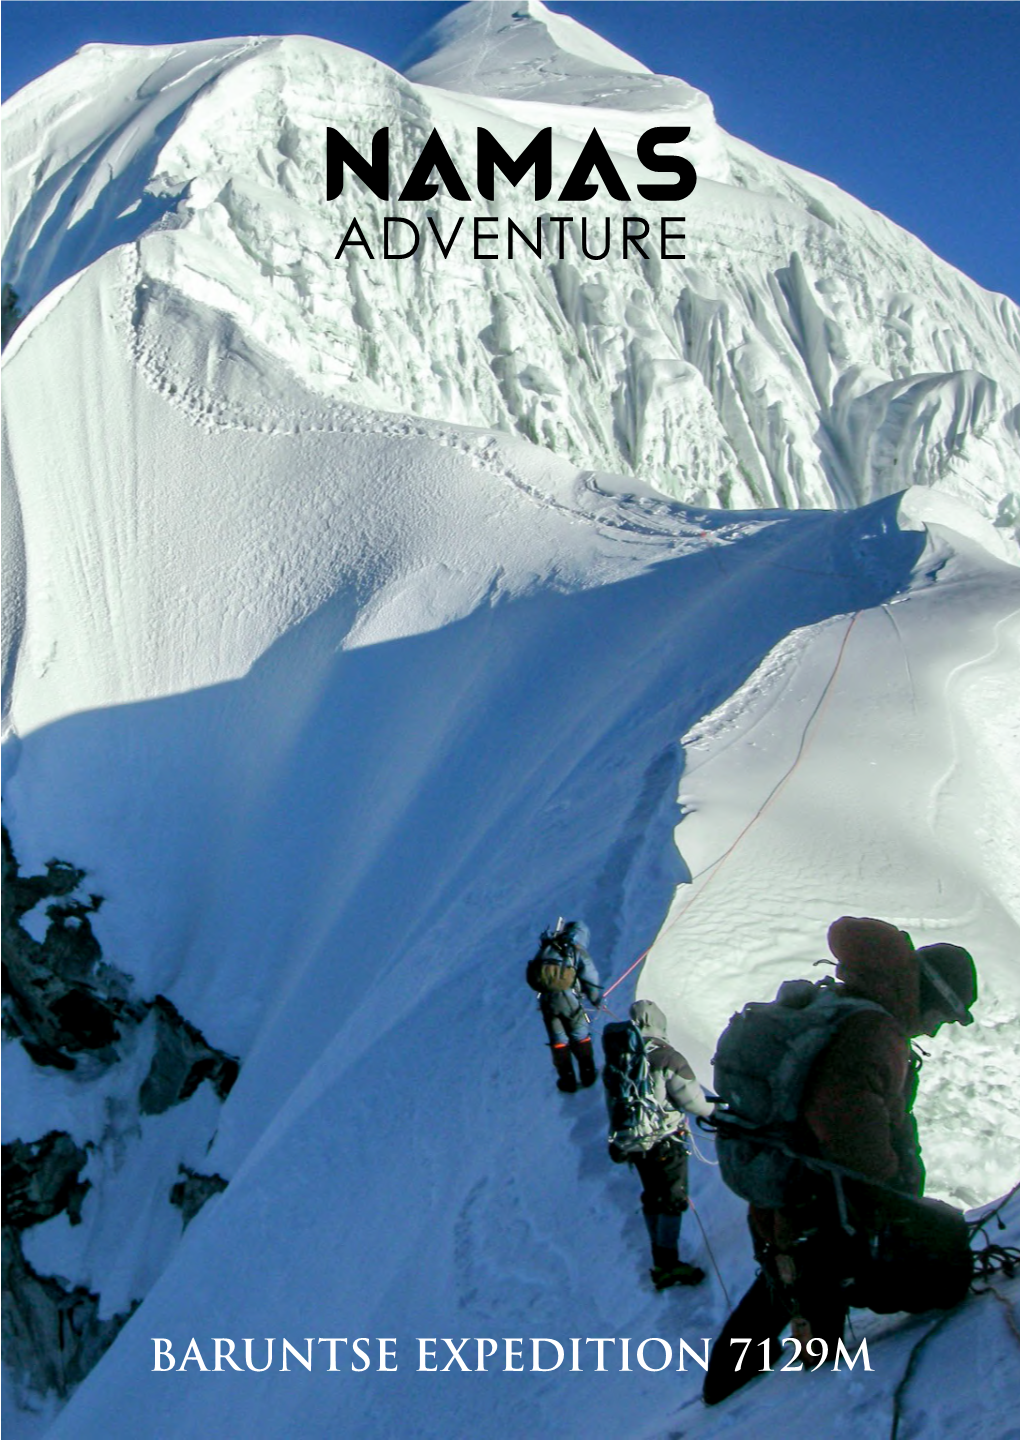 Baruntse Peak Expedition with Mera Peak Climbing Is One of the Best Climb to Achieve at 7000M Level